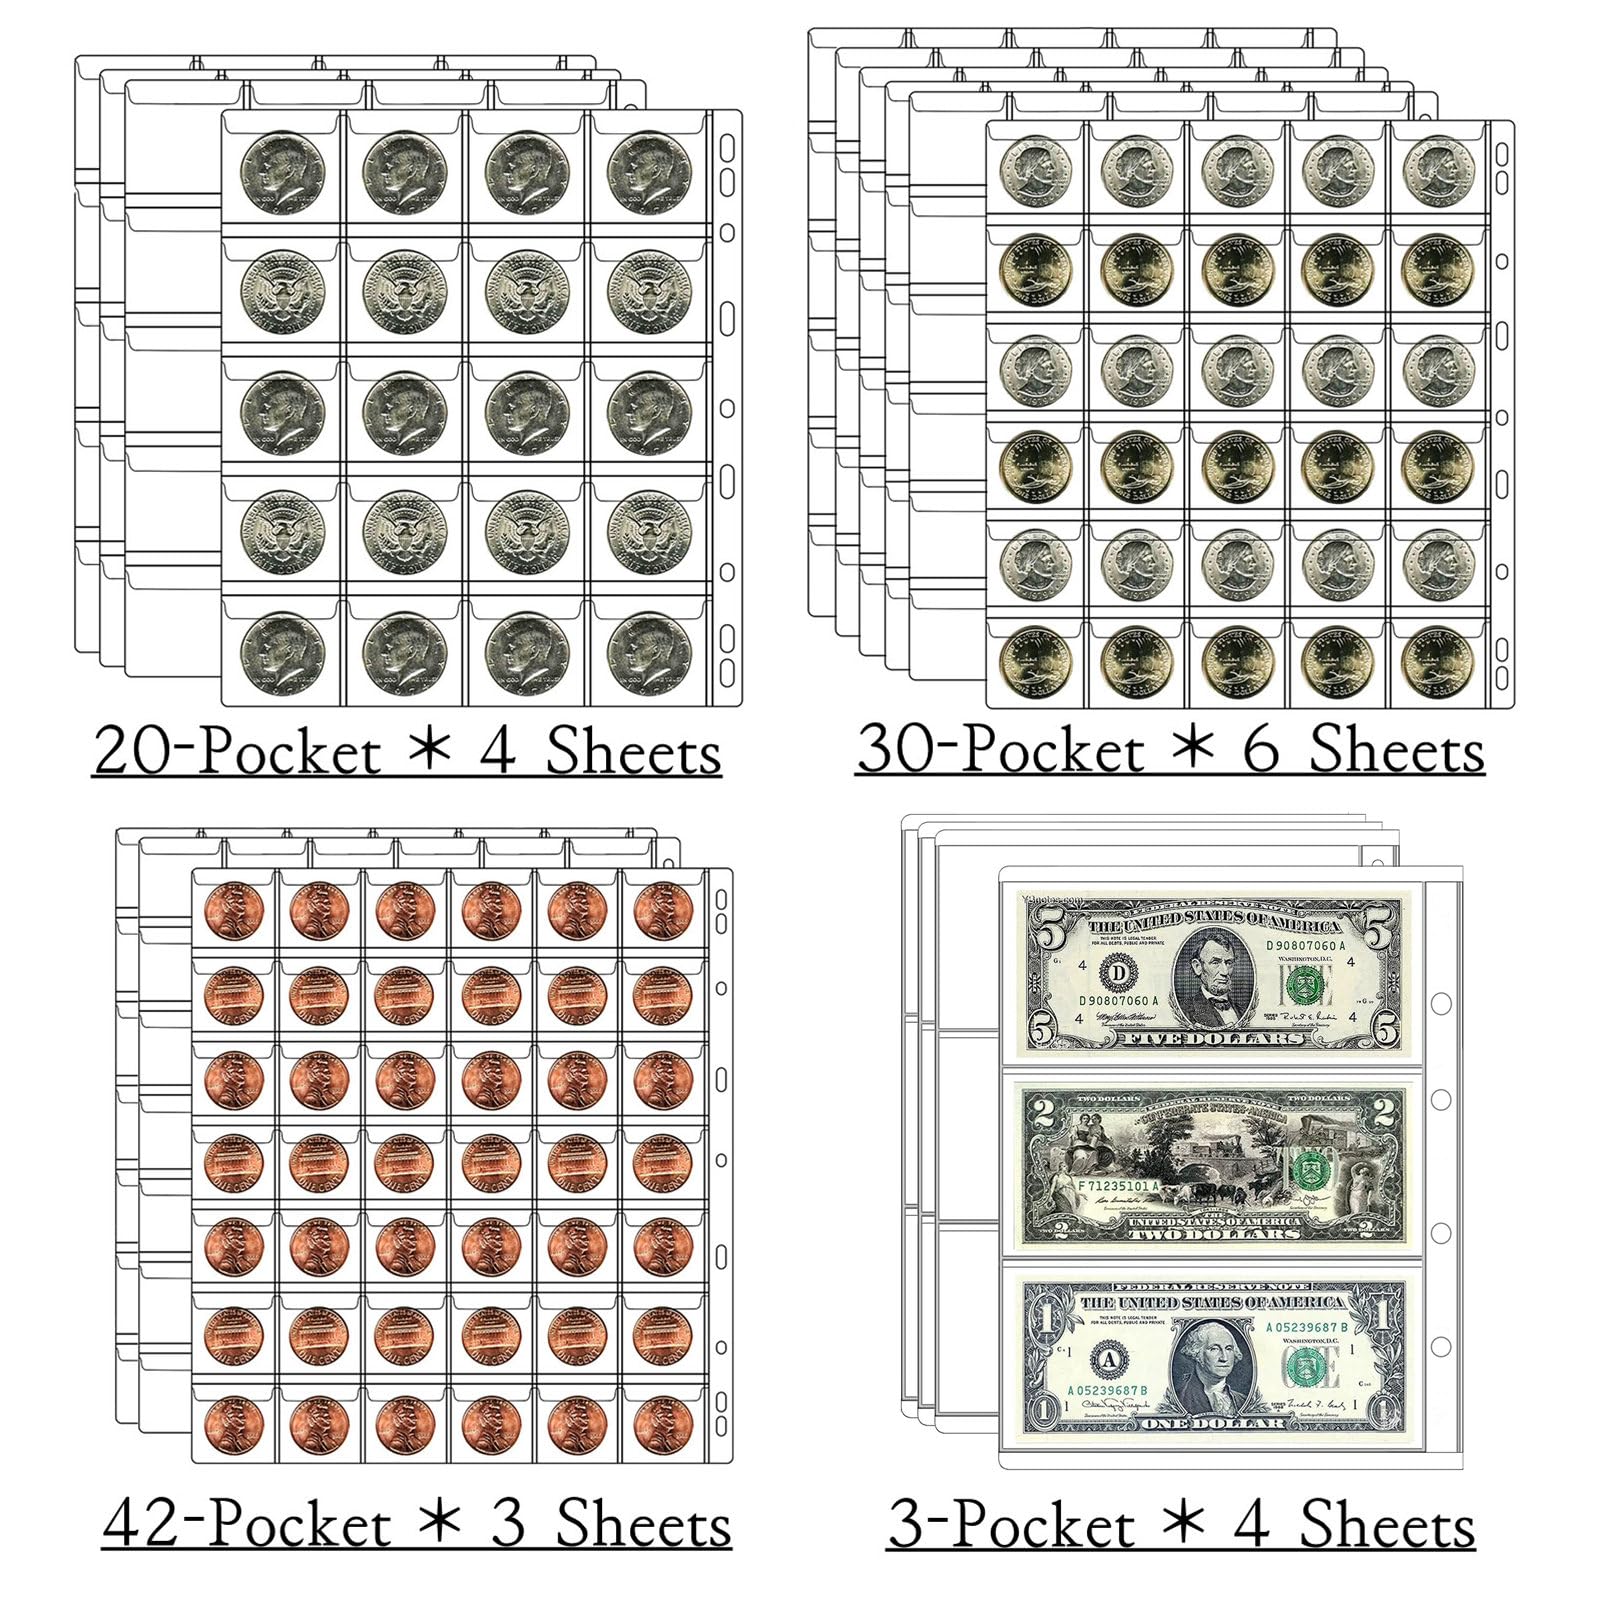 Ettonsun 398-Pocket 4-in-1 Leather Coin & Paper Money Collecting Holder Album,Large Coin Collection Book with 386 Coin Pockets & 12 Currency Pockets,Coin Collection Supplies Book Holder for Collectors